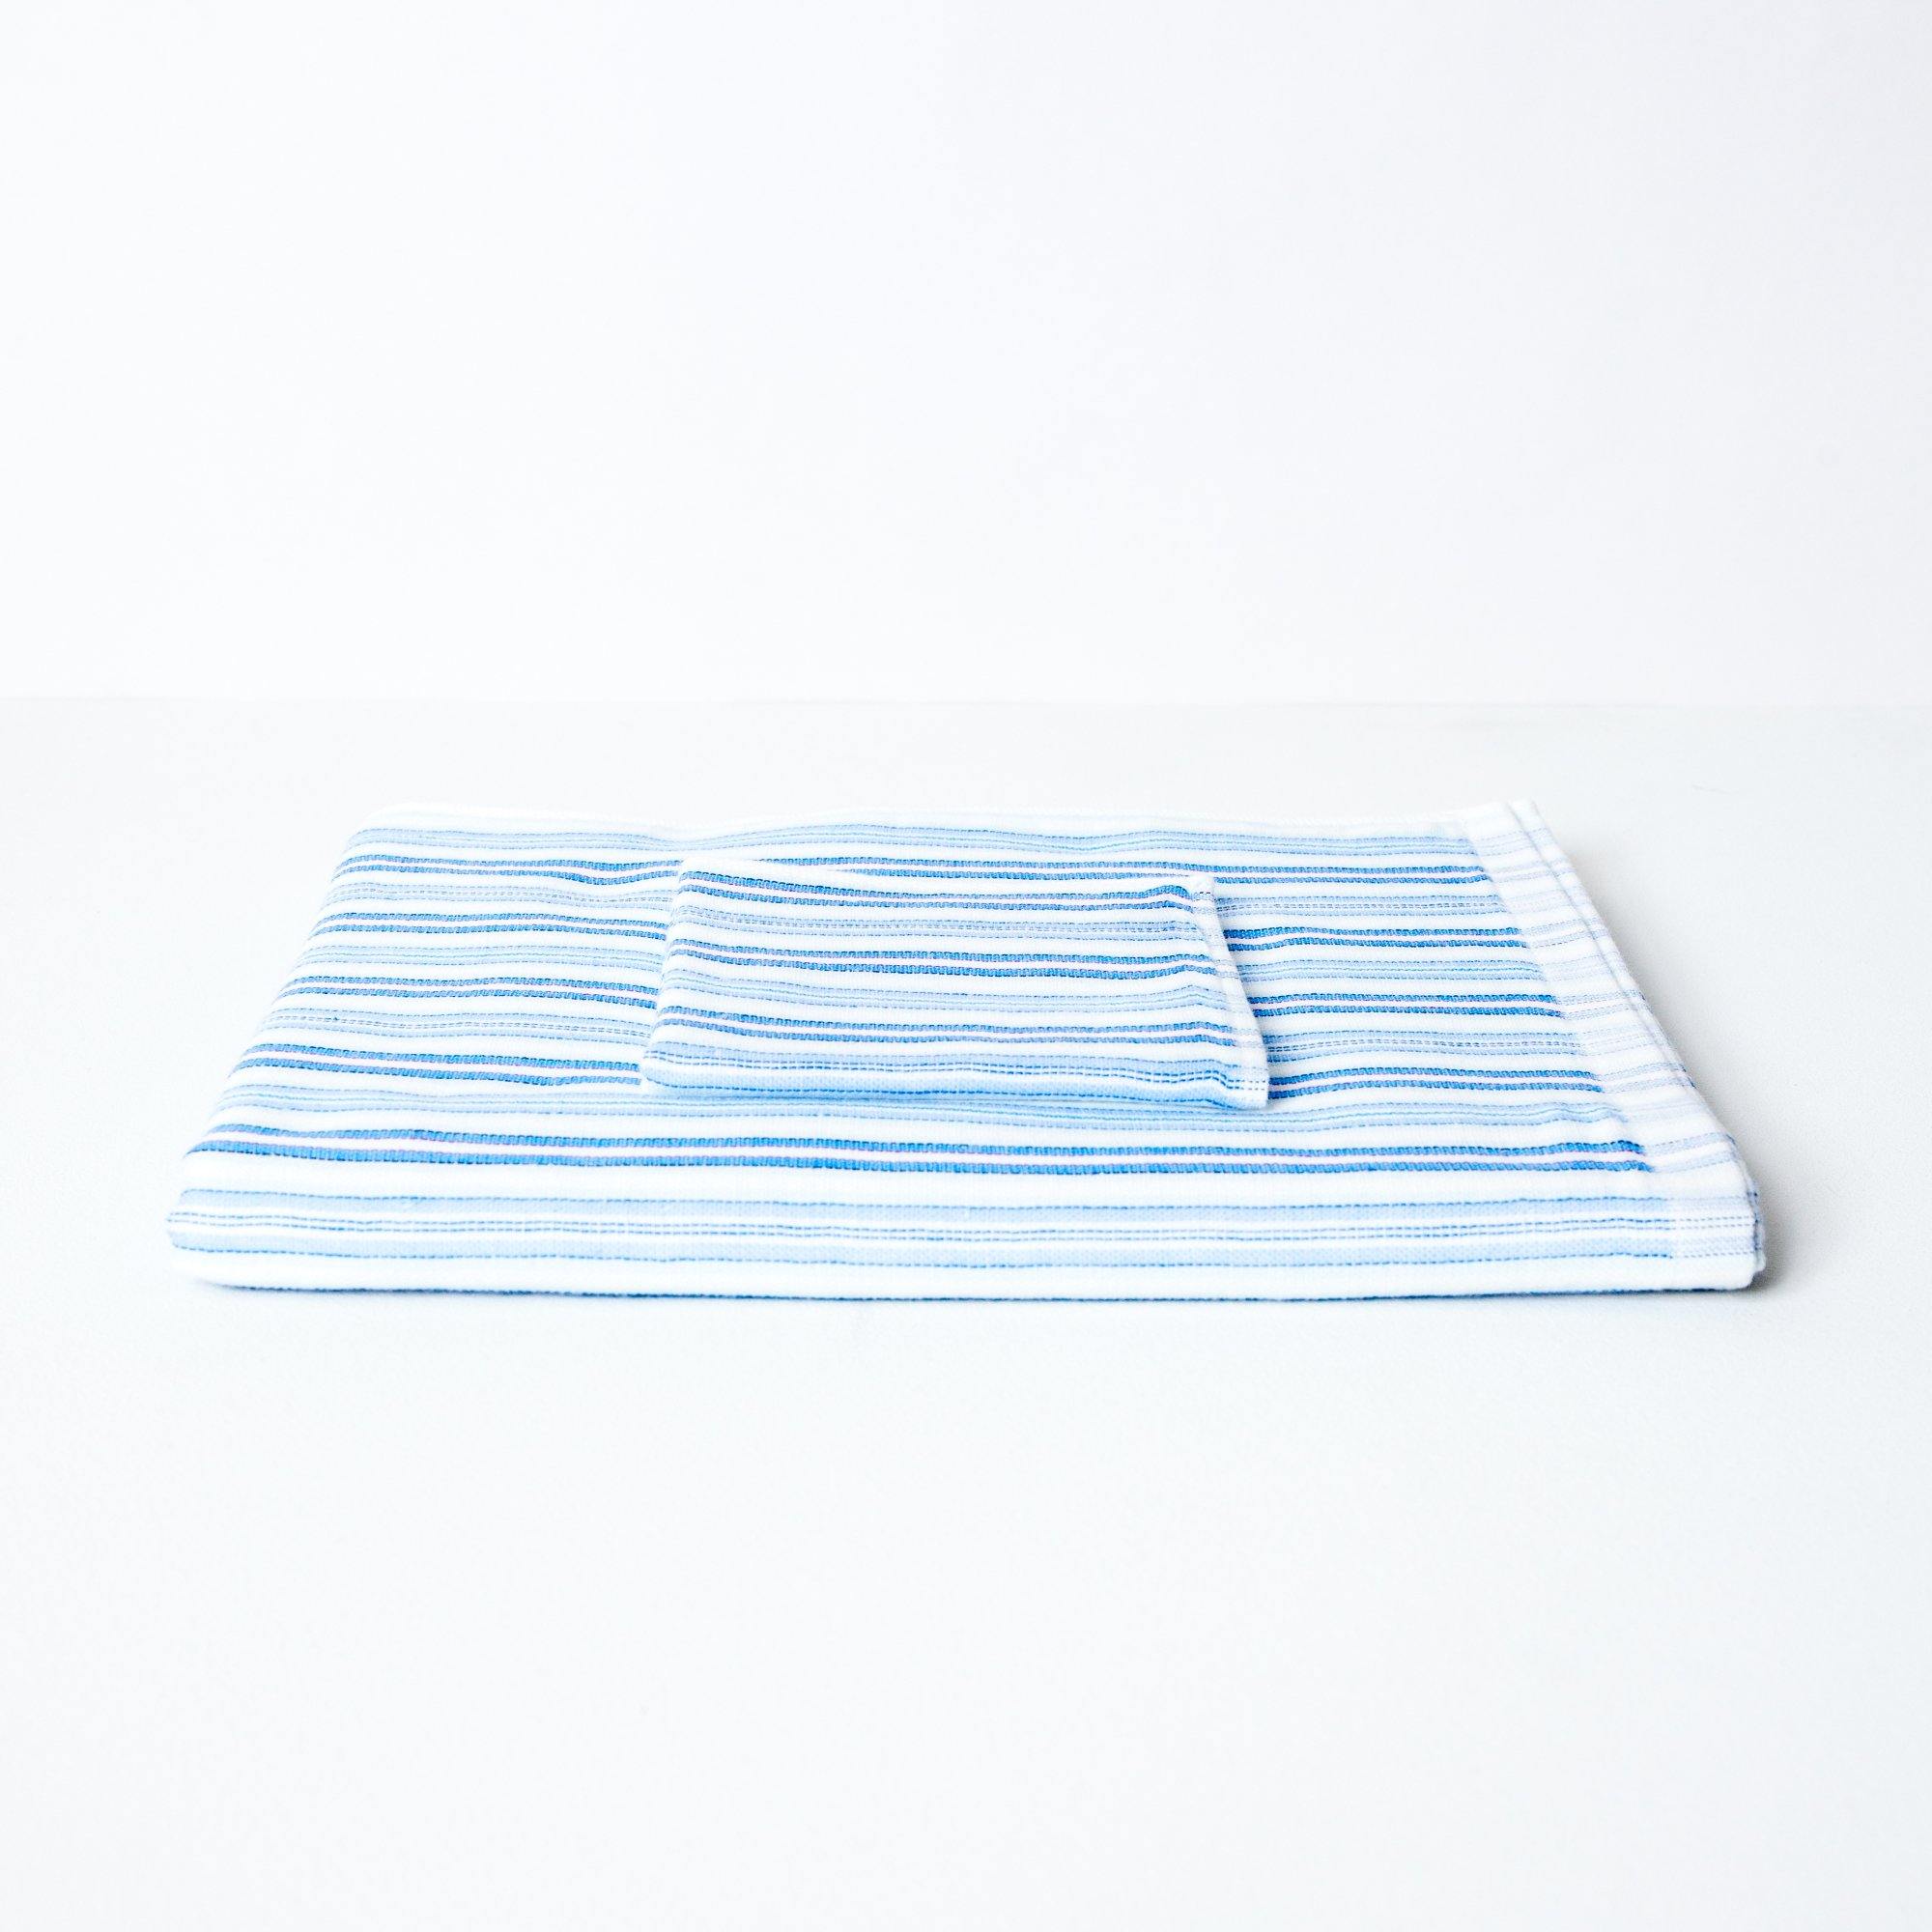 A striped towel with tones of blue, neatly folded with a coordinating flannel on top.